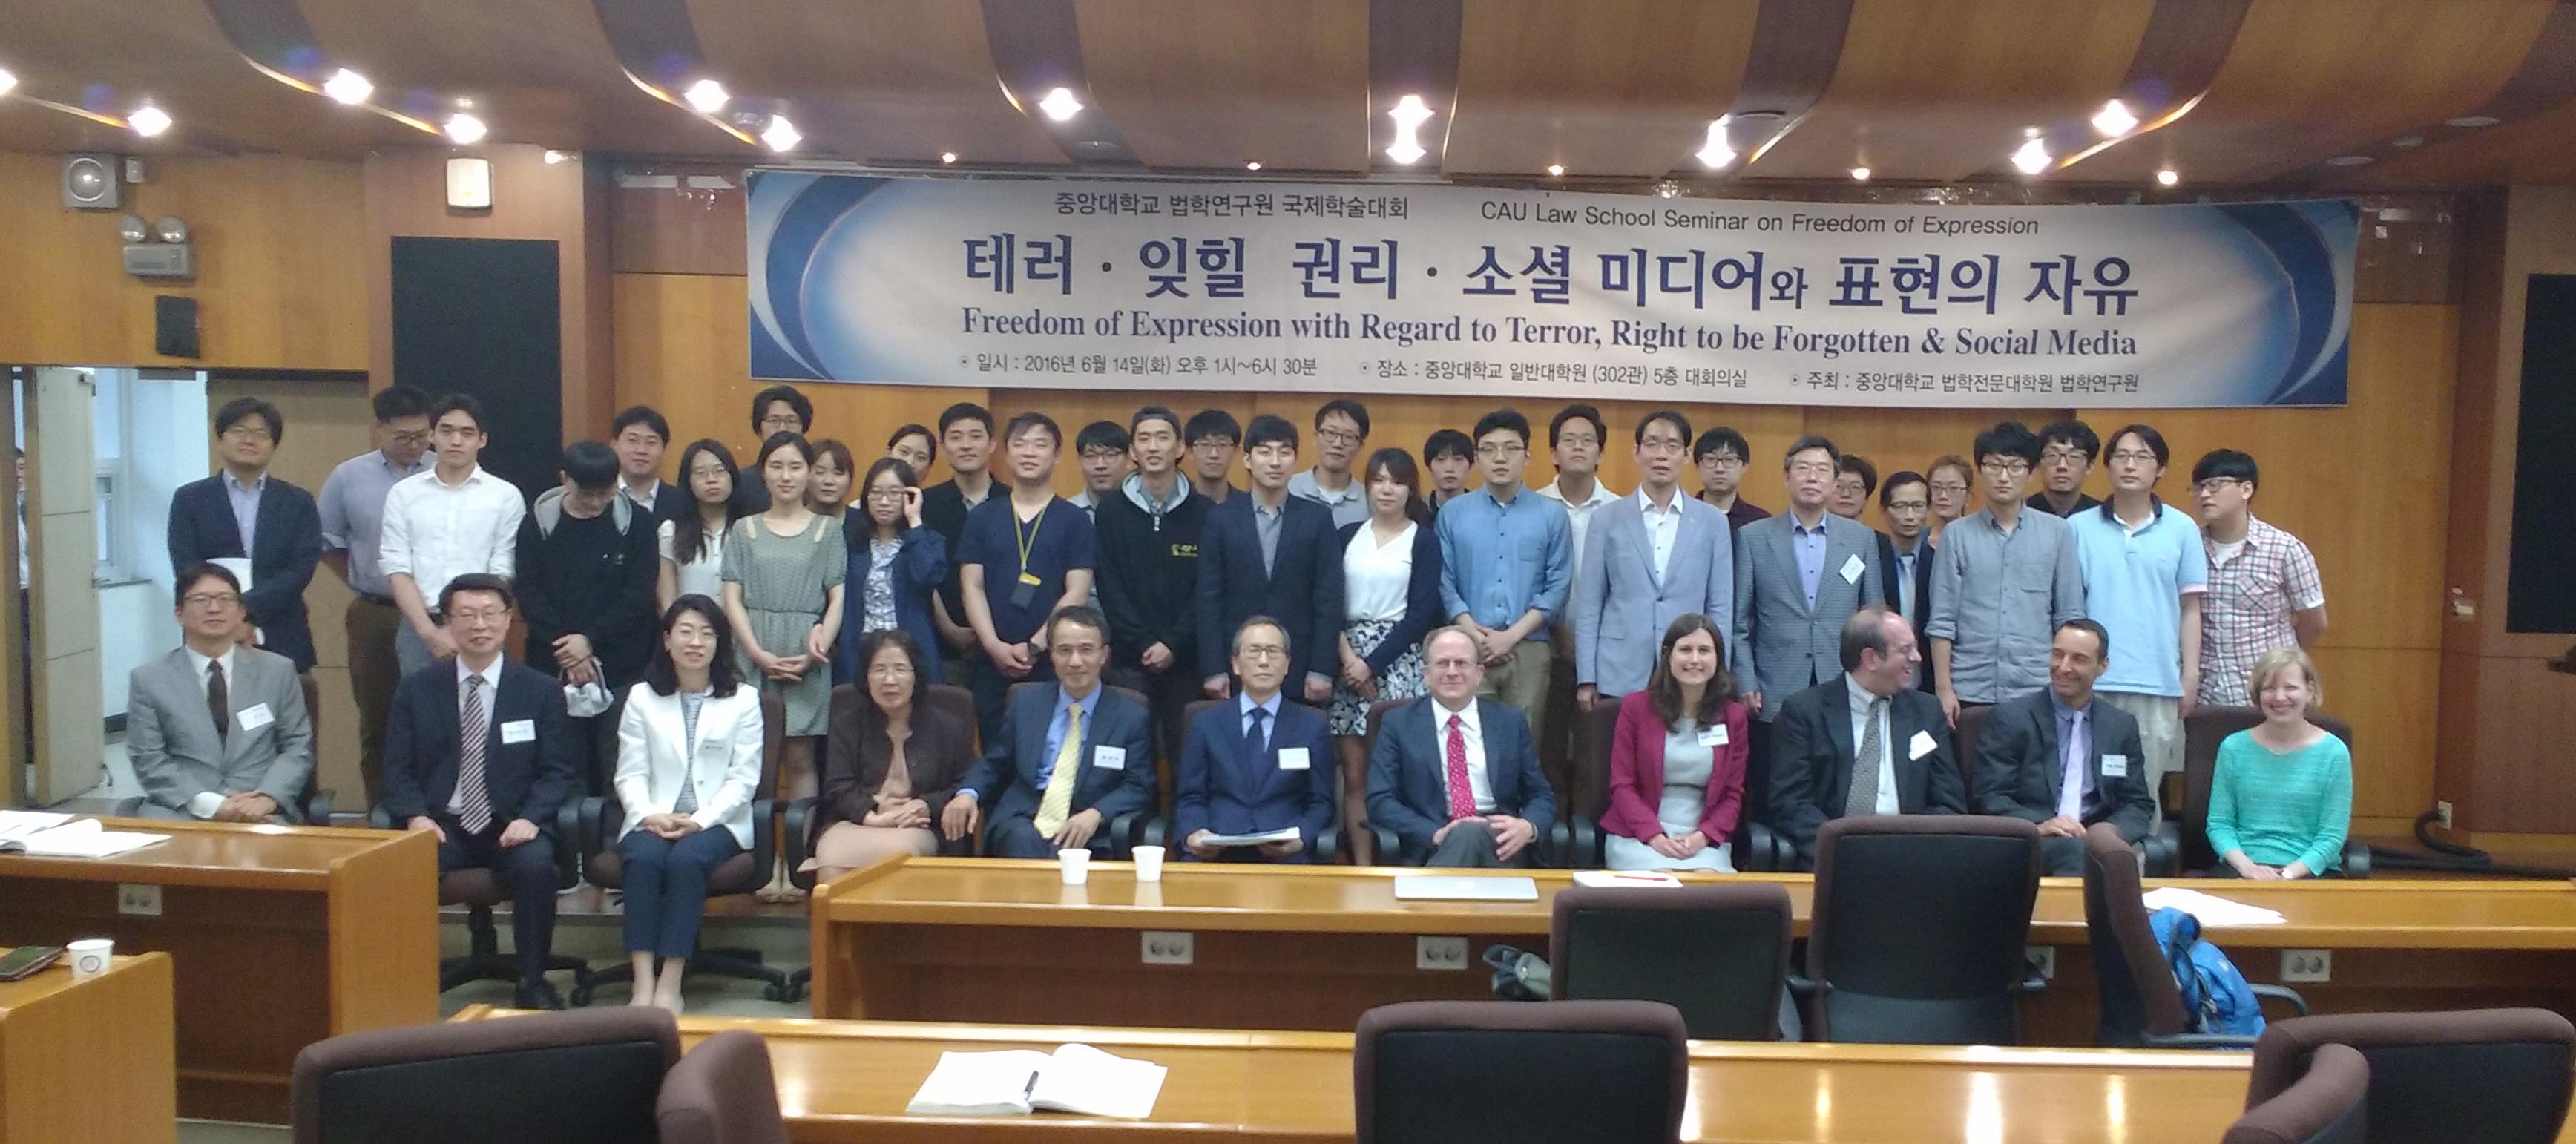 Freedom of Expression conference South Korea 14-06-16 web 2